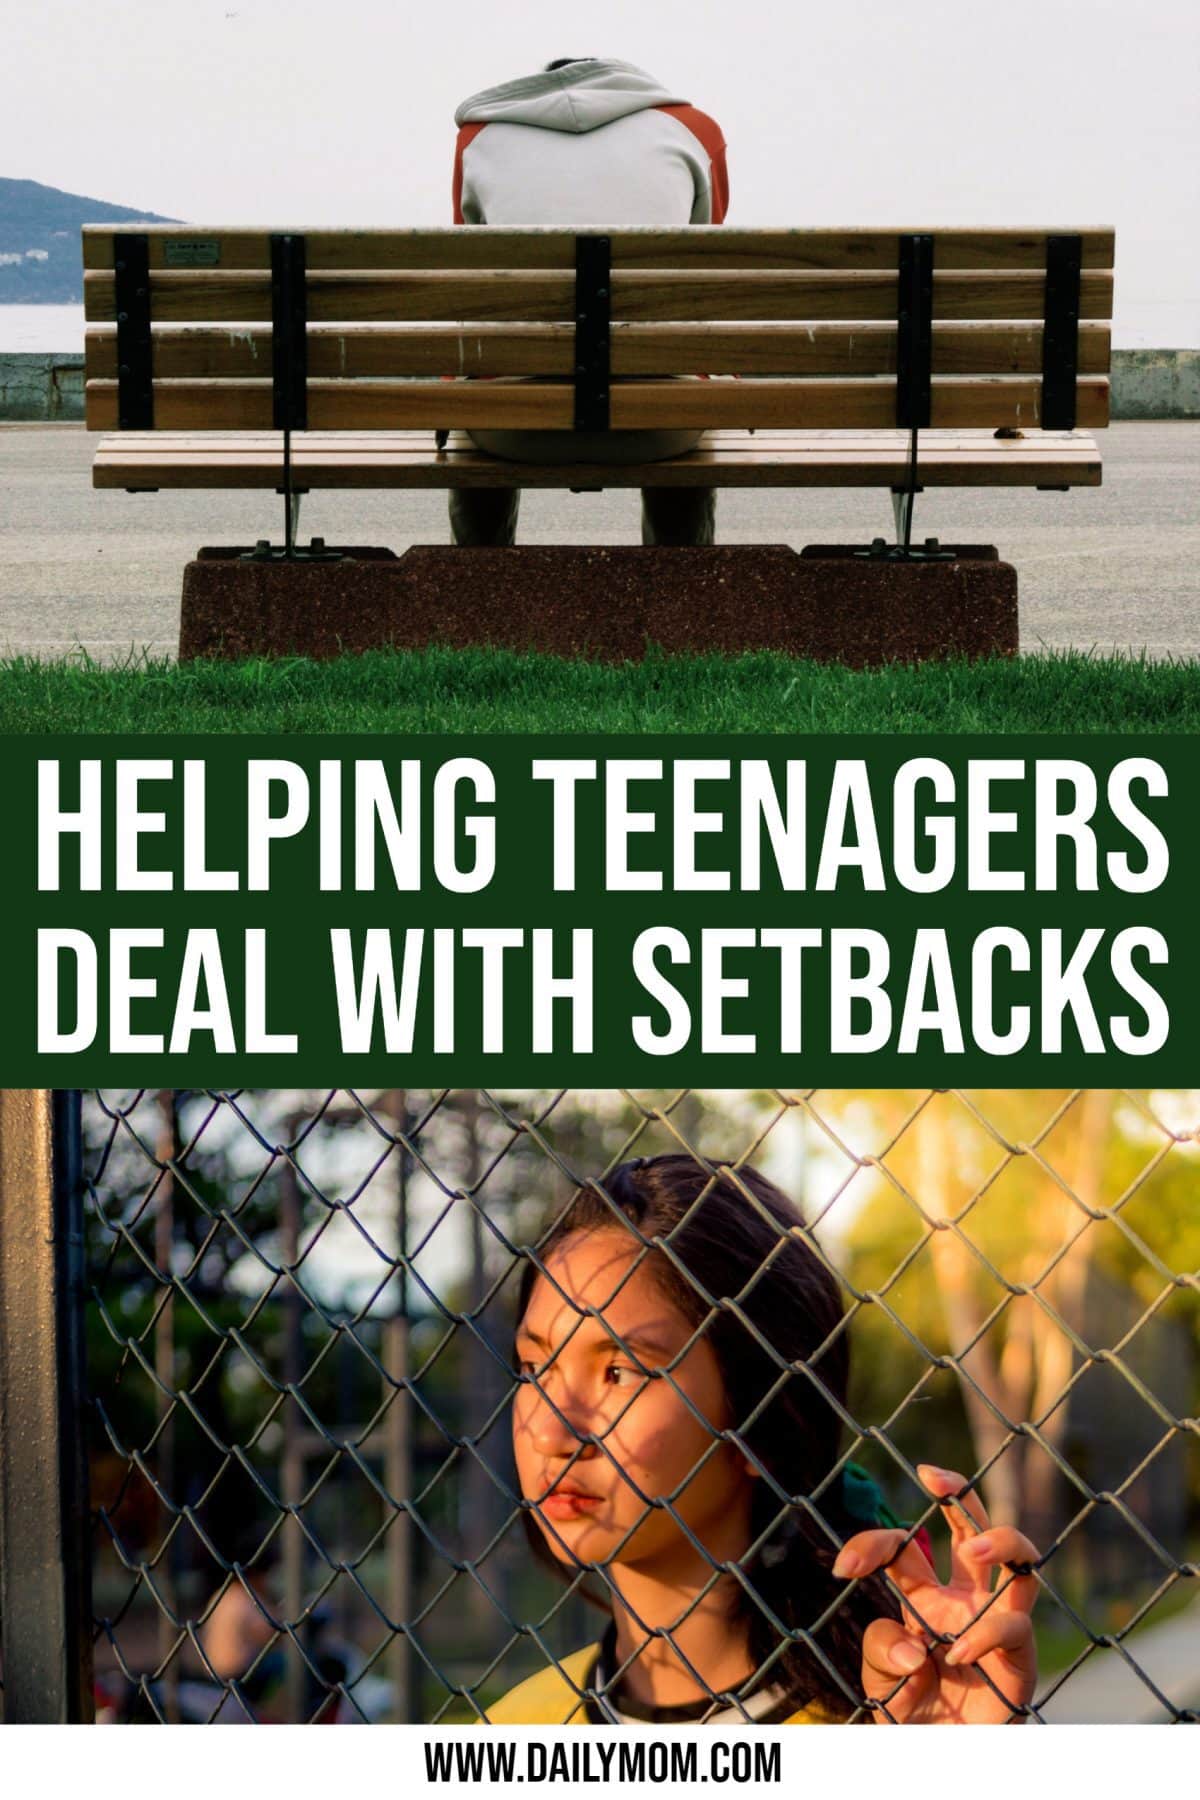 Helping teenagers deal with setbacks